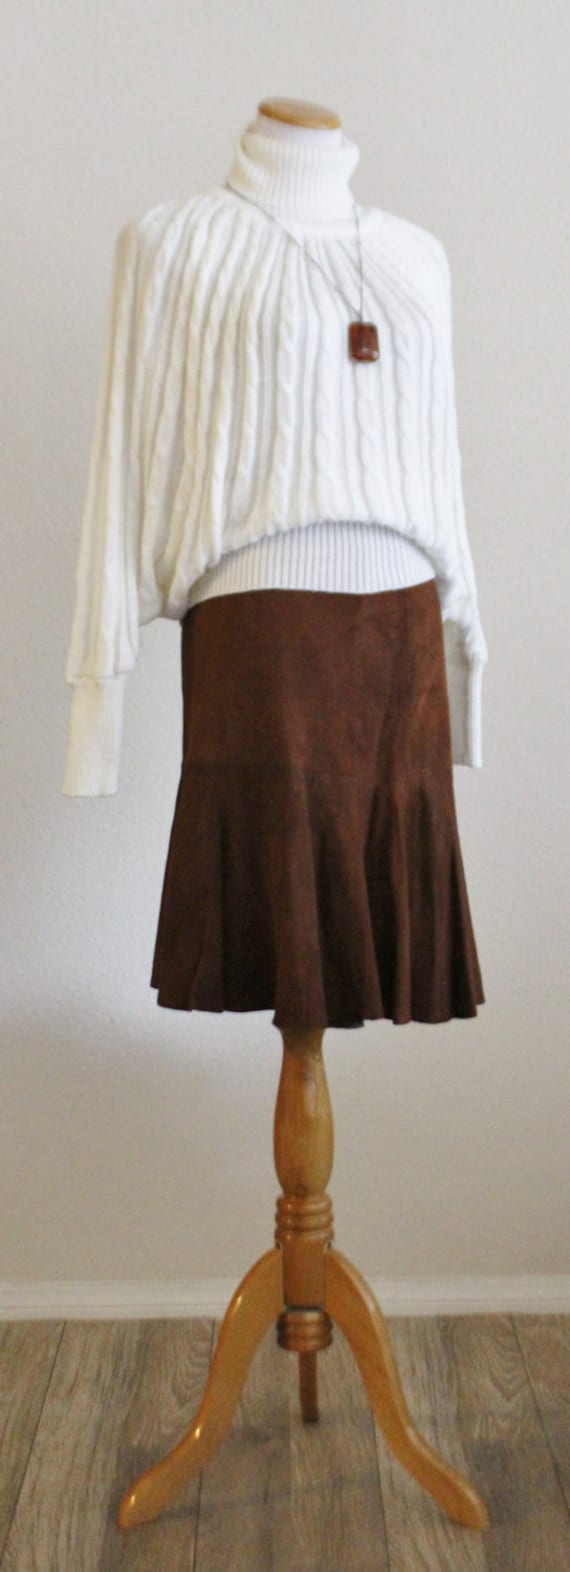 Vintage 60's 70's Lambs Suede Leather Mini Skirt … - image 5